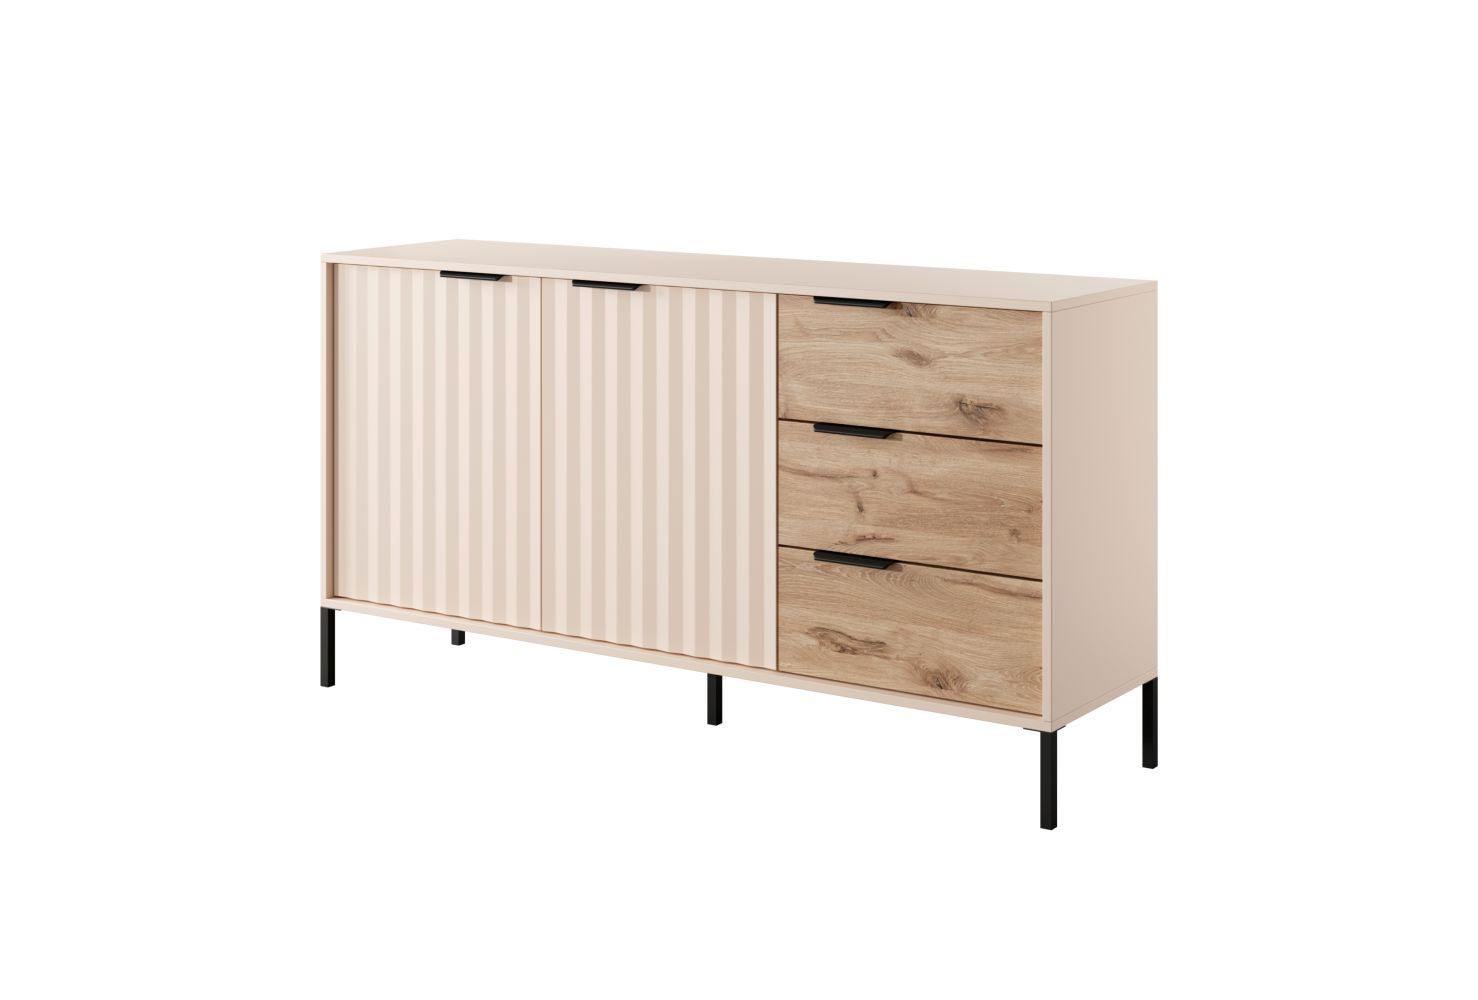 Sideboard with modern design Fouchana 02, color: Beige / Viking oak - Dimensions: 81 x 153 x 39.5 cm (H x W x D), with three drawers